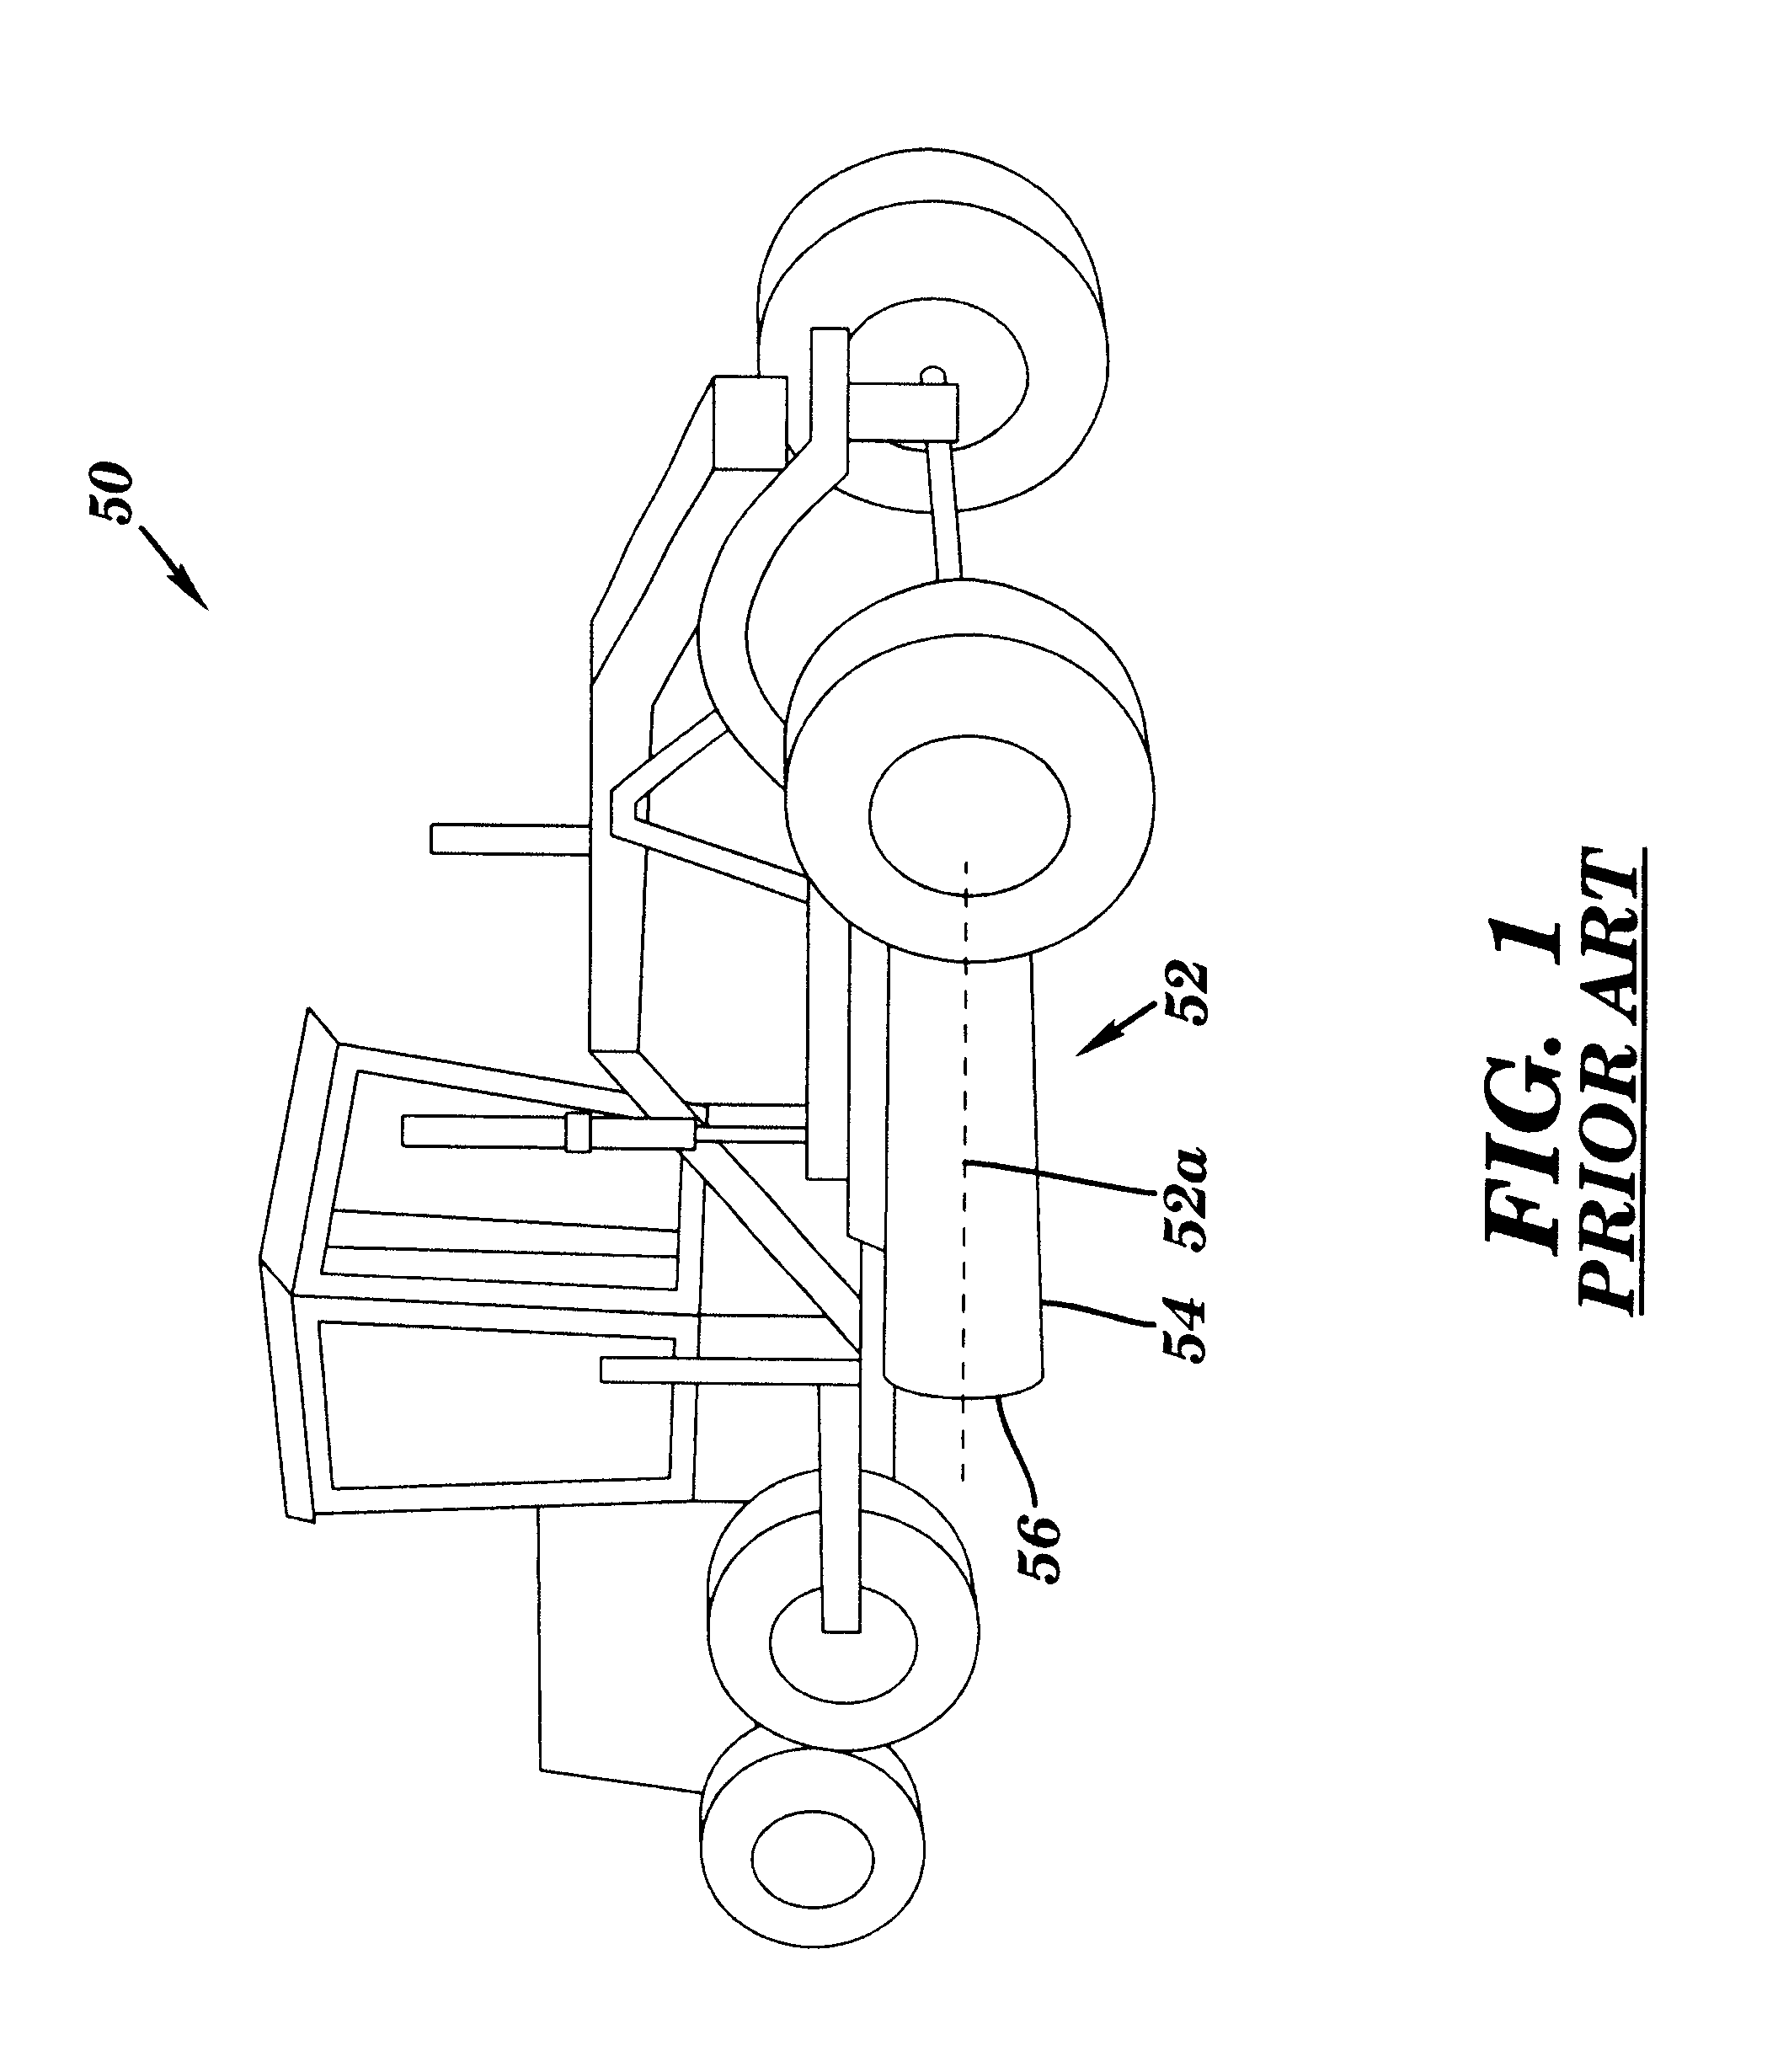 Blade control apparatuses and methods for an earth-moving machine